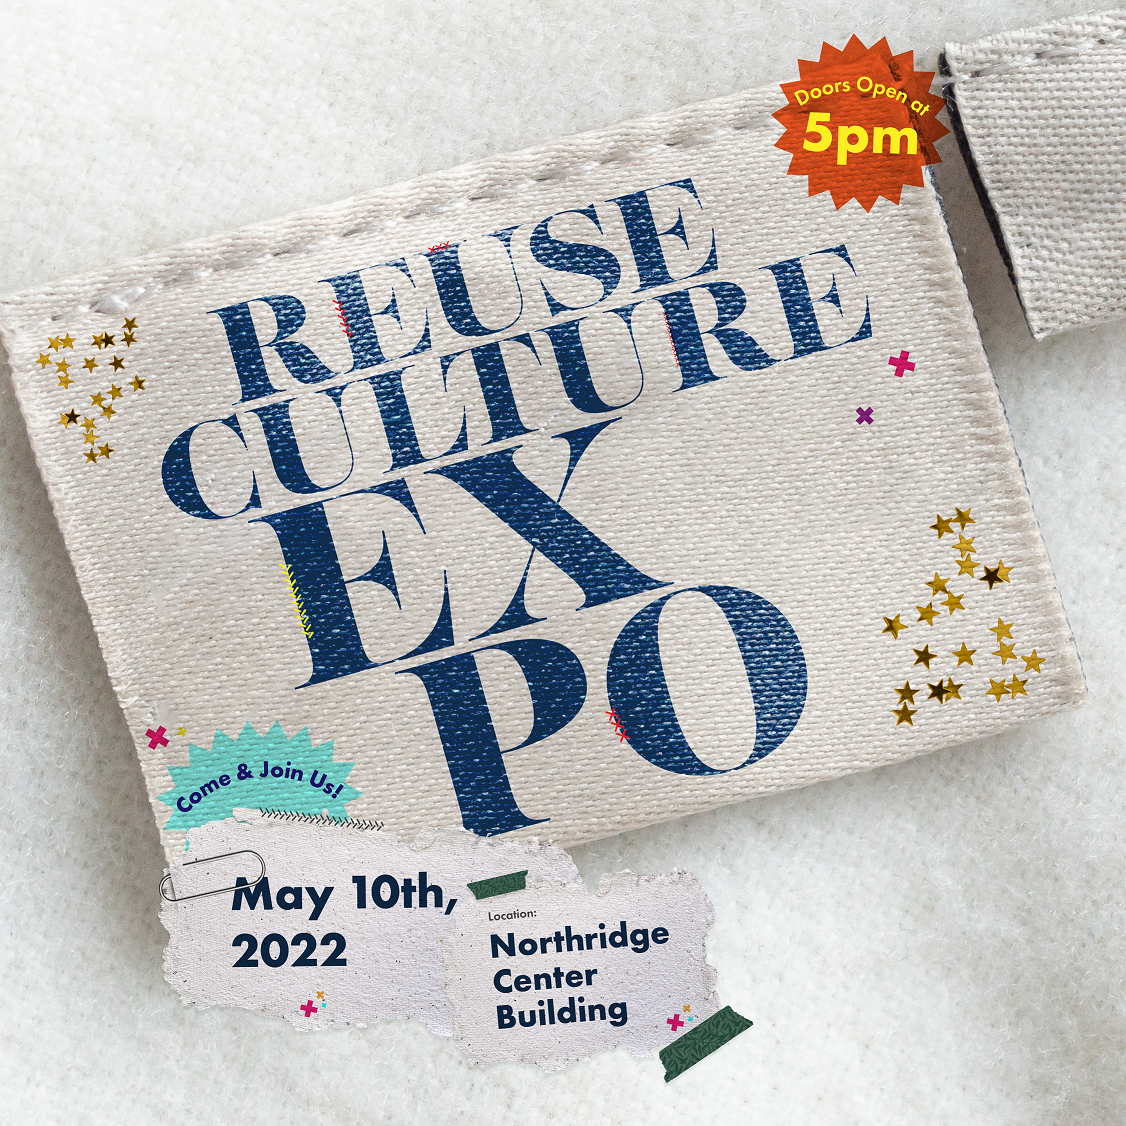 Reuse Culture Expo May 10th 2022 Doors open at 5pm Location Northridge Center Building